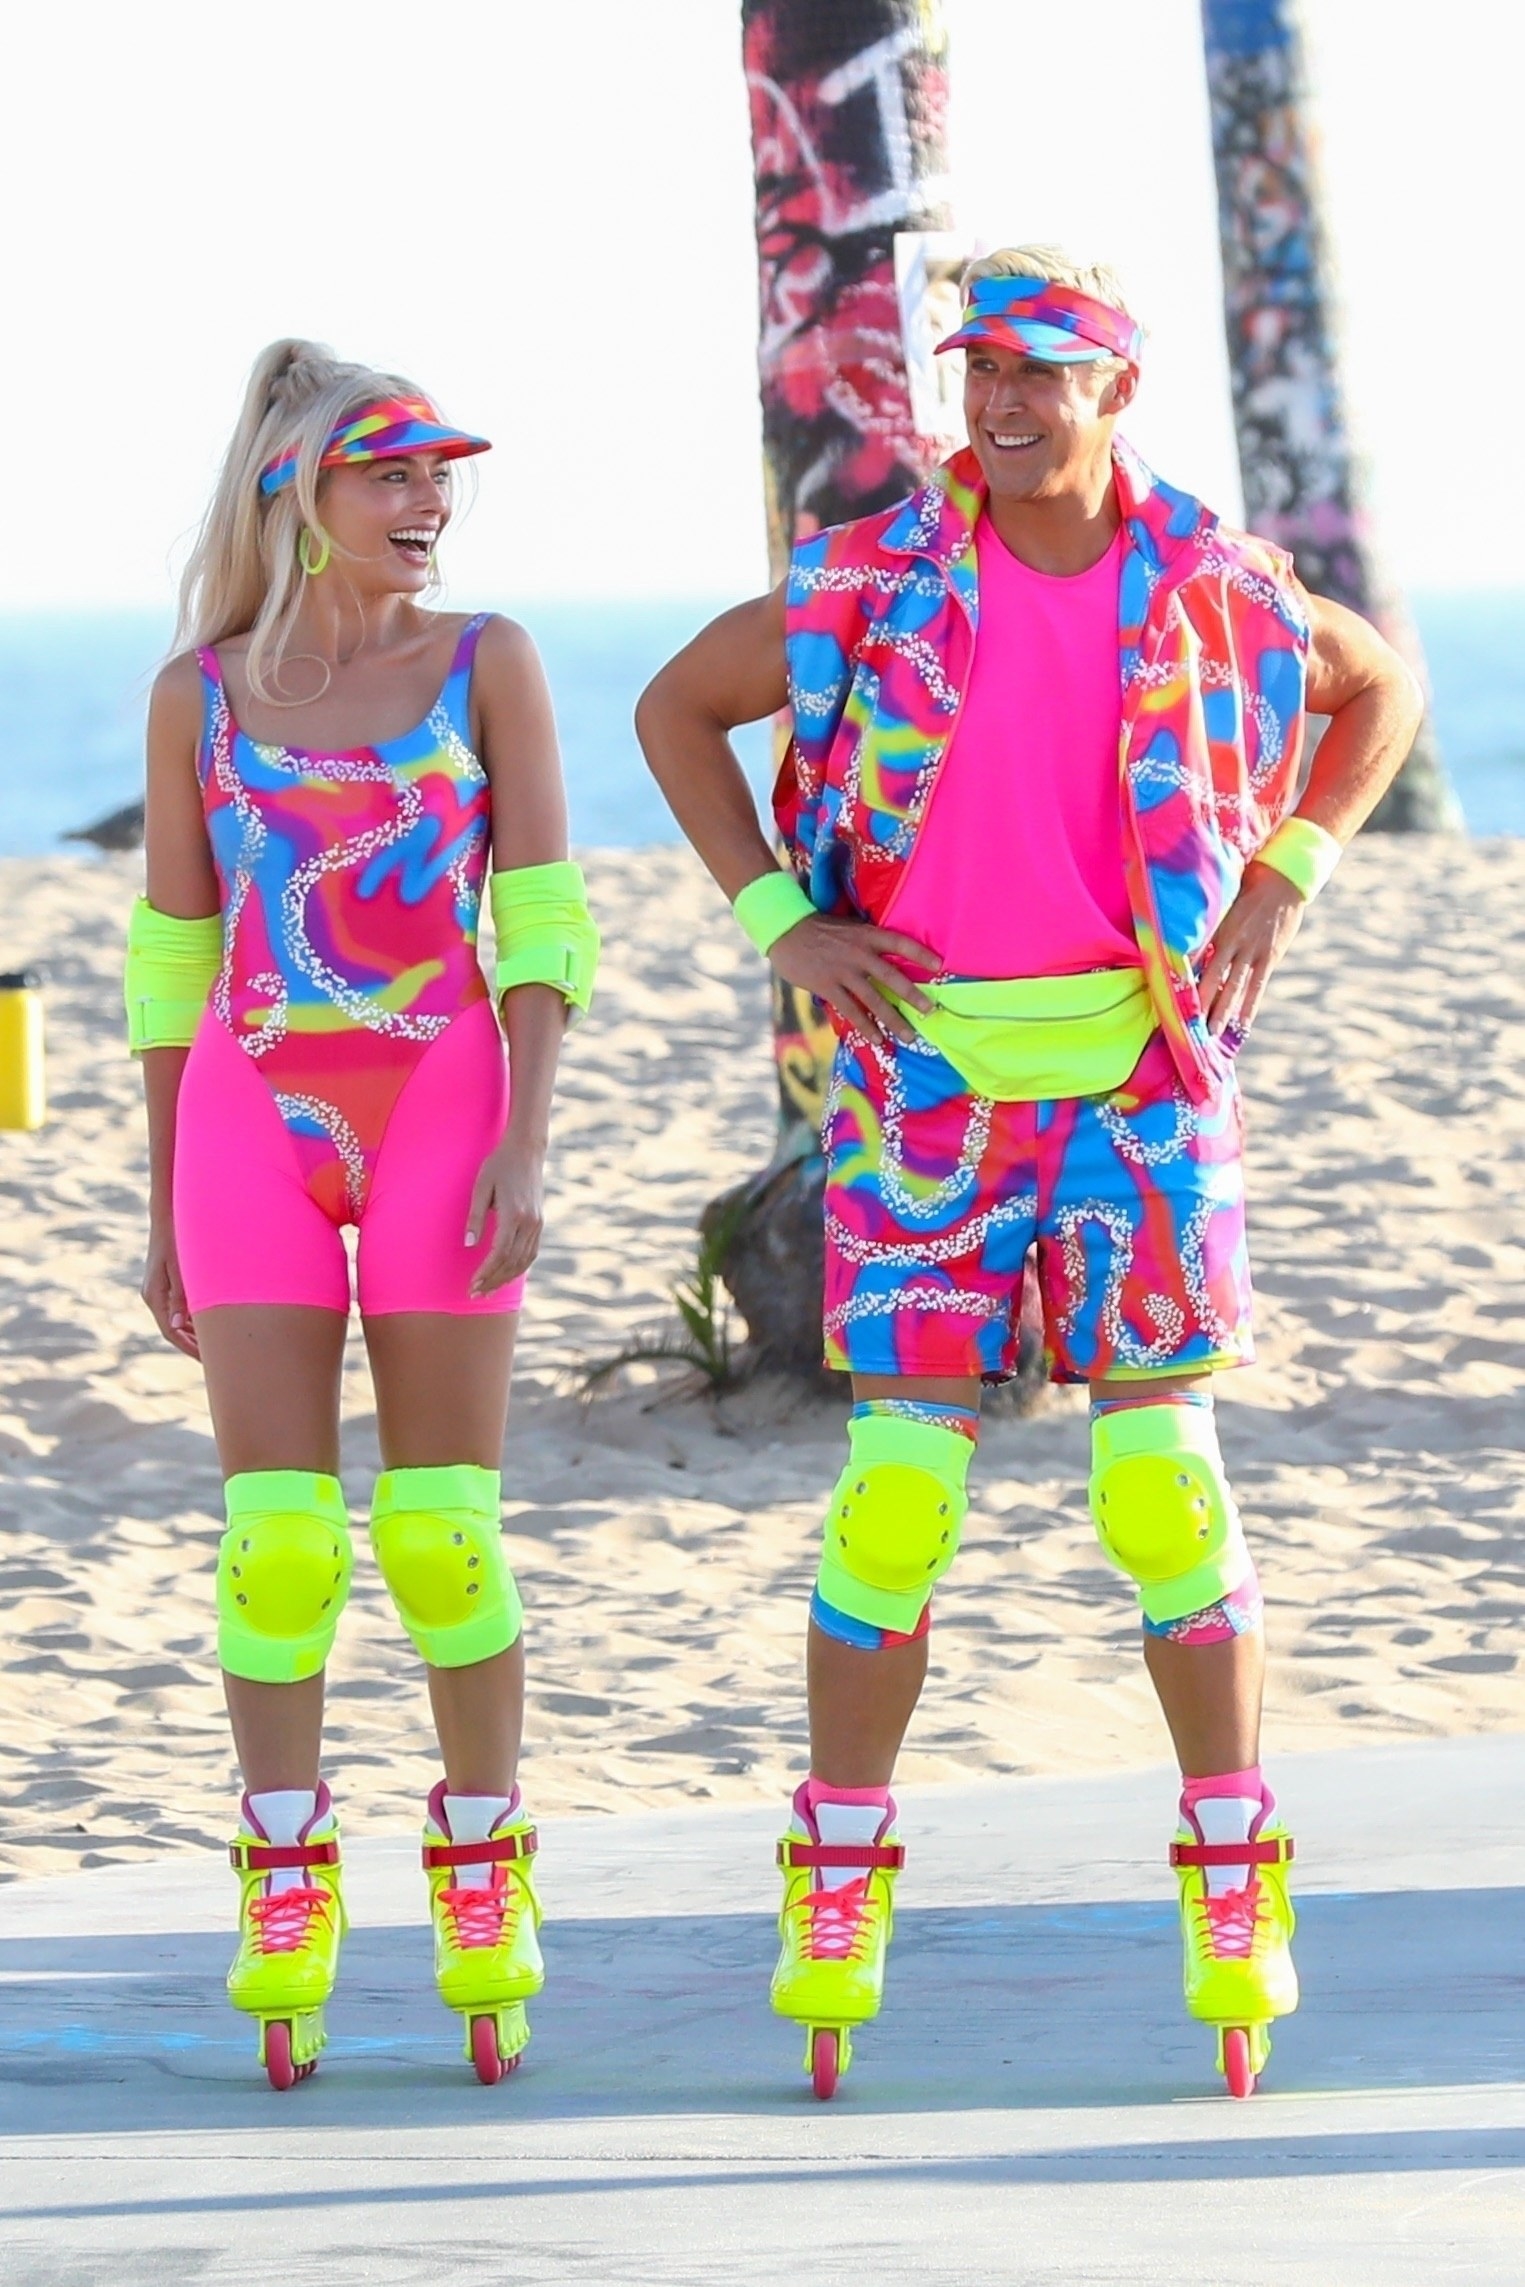 Margot still in rollerblades, now joined by Ryan; they&#x27;re both wearing matching neon outfits with bright knee pads and rollerblades